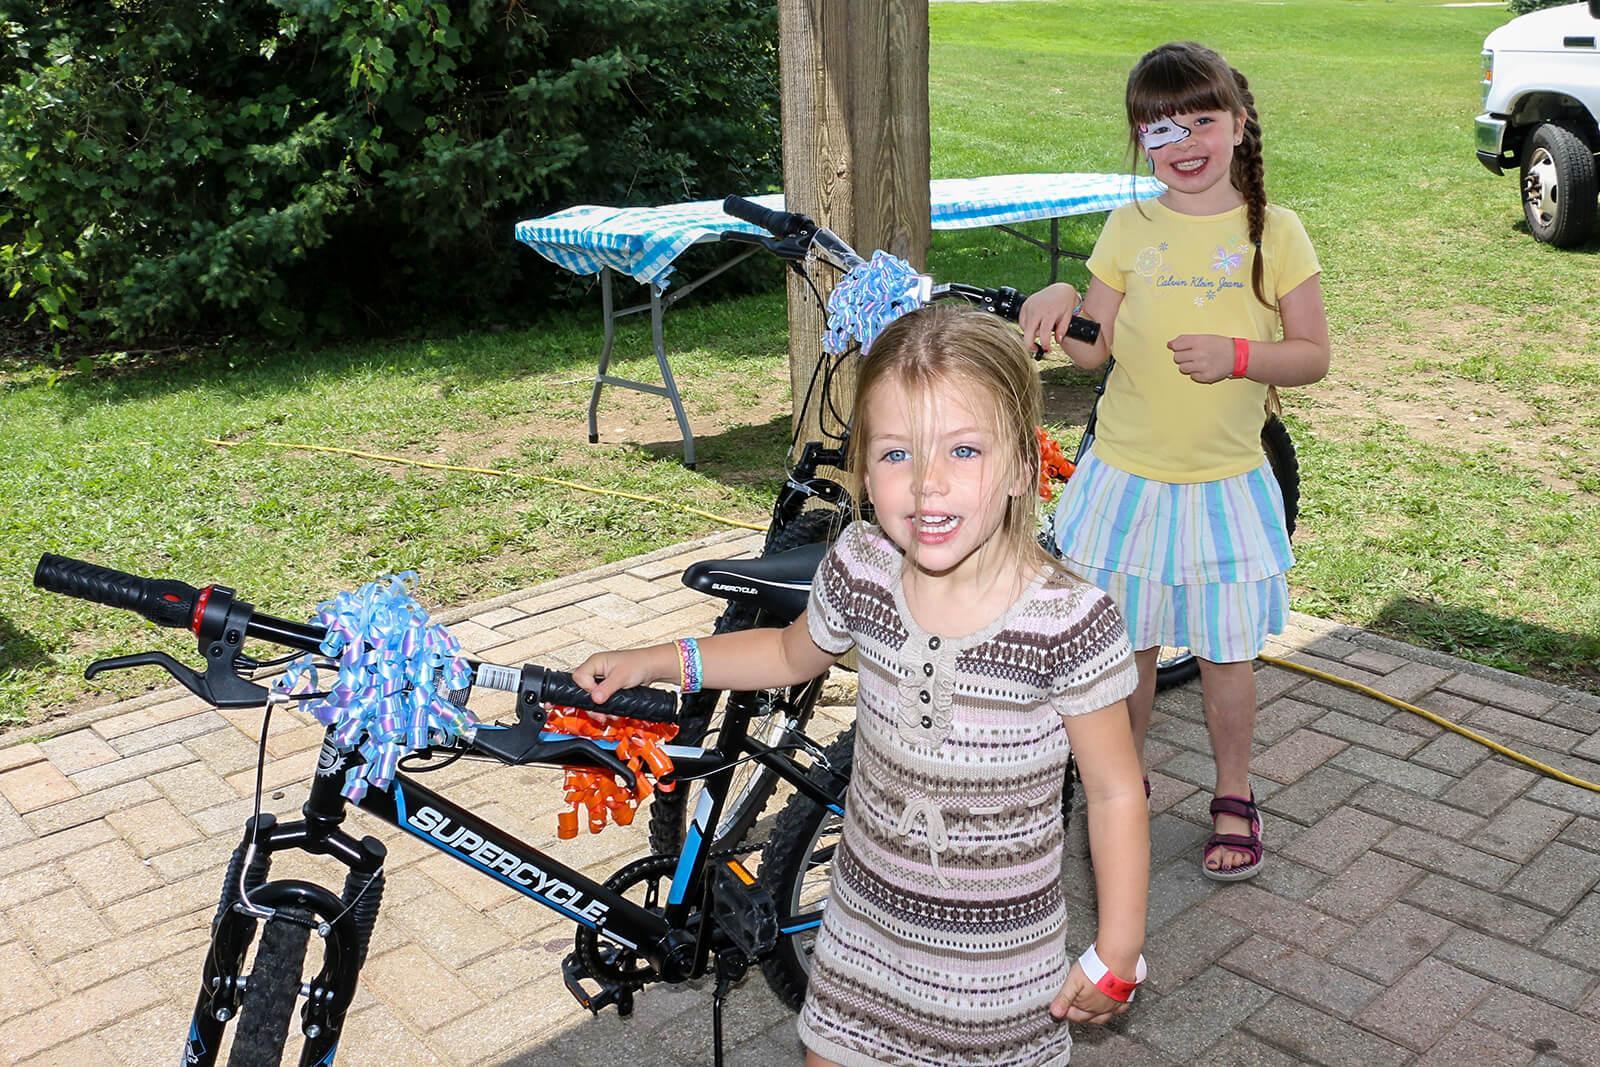 Eden Moriarty, 6 (back) and Brooke Garner, 4, held the winning raffle tickets and each took home a brand new bicycle courtesy of the Waterloo Chapter.